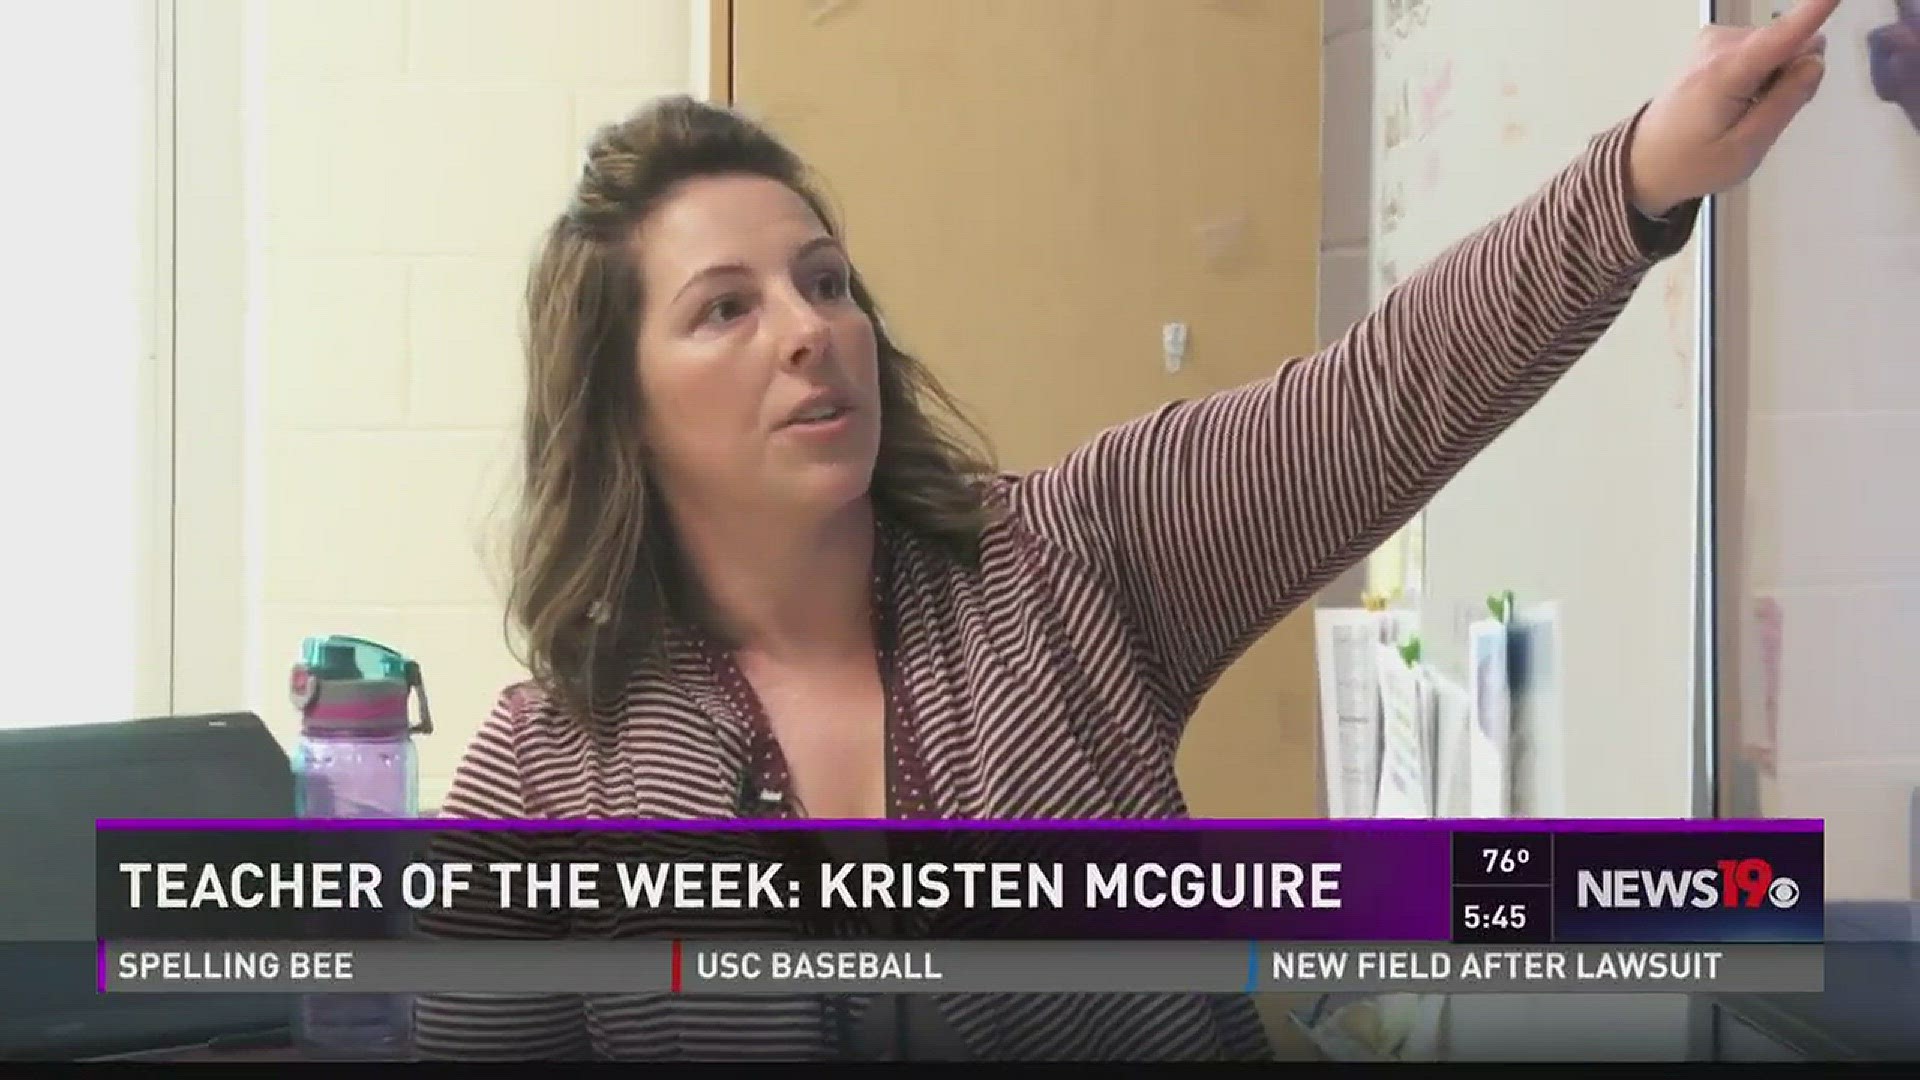 Kristen McGuire of Westwood High school is the Teacher of the Week for March 7, 2017.